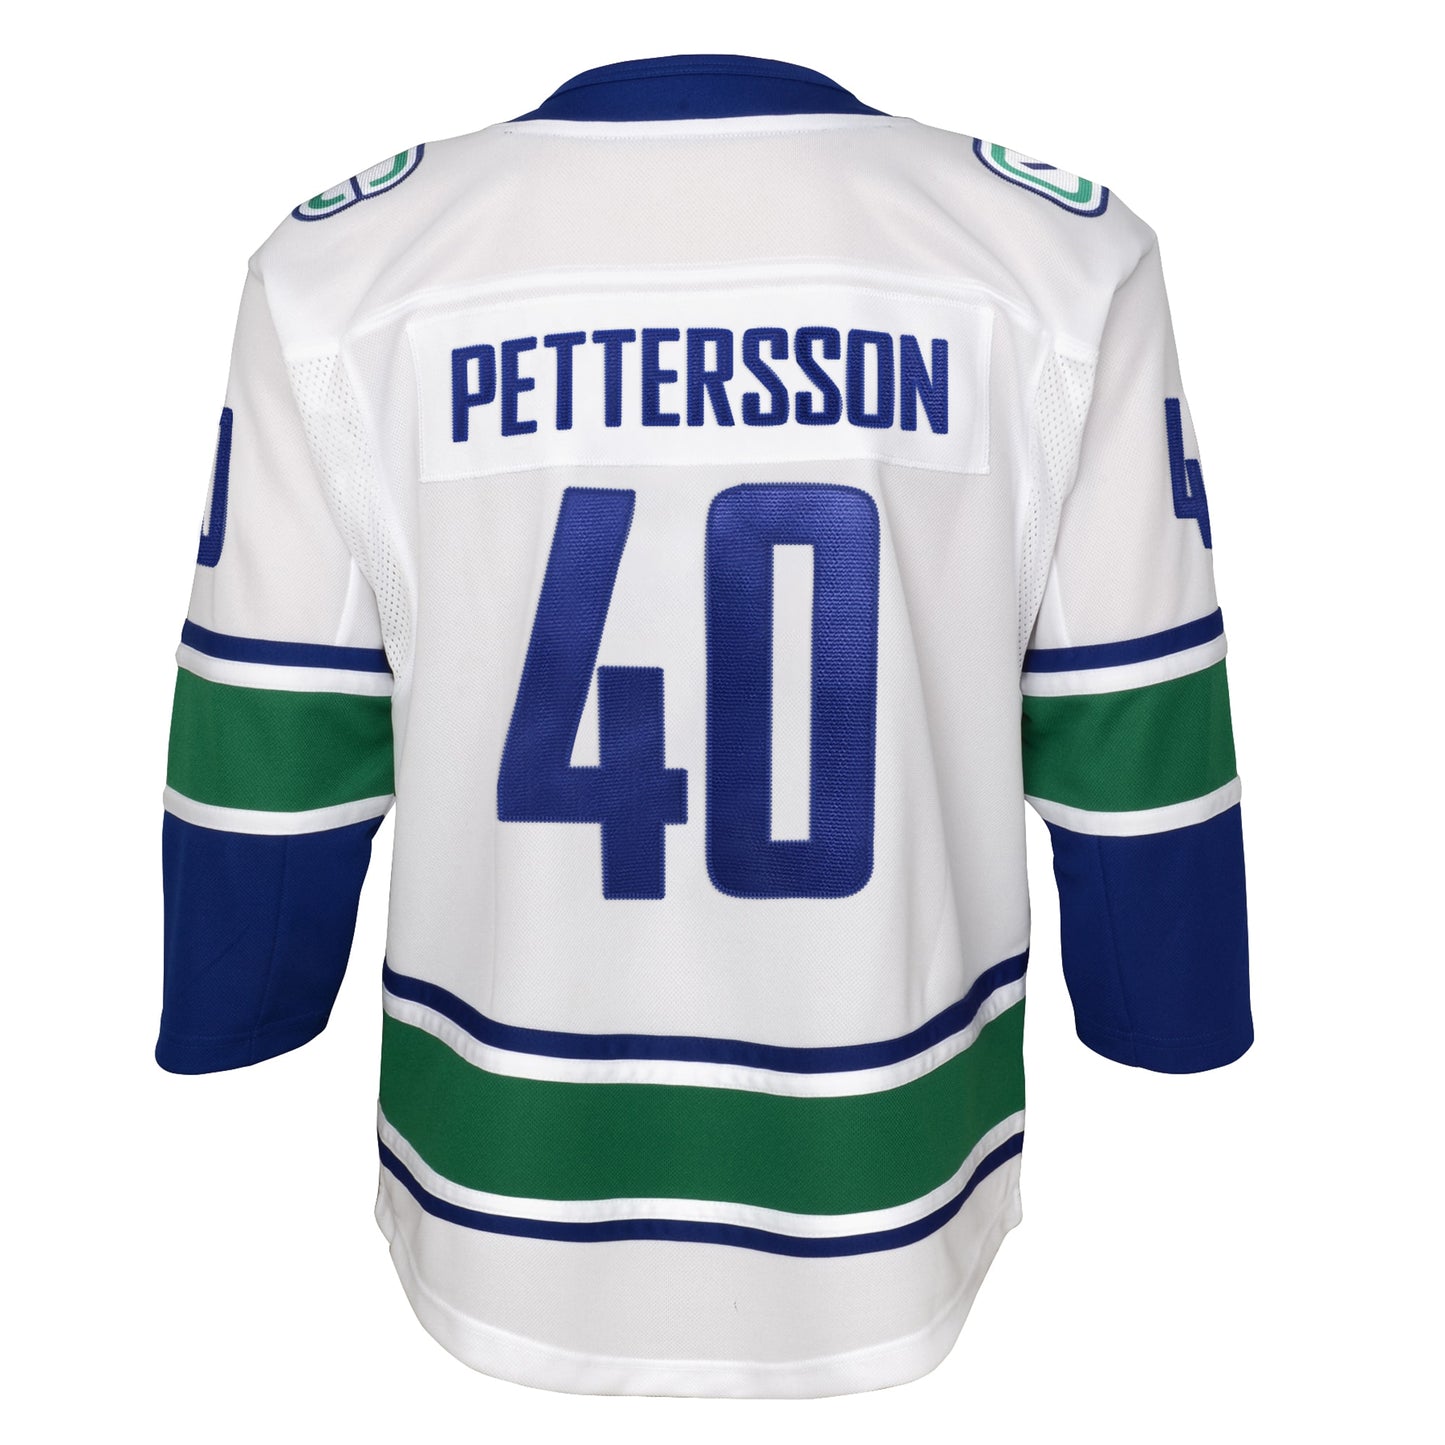 Elias Pettersson Vancouver Canucks Youth 2019/20 Away Premier Player Jersey - White